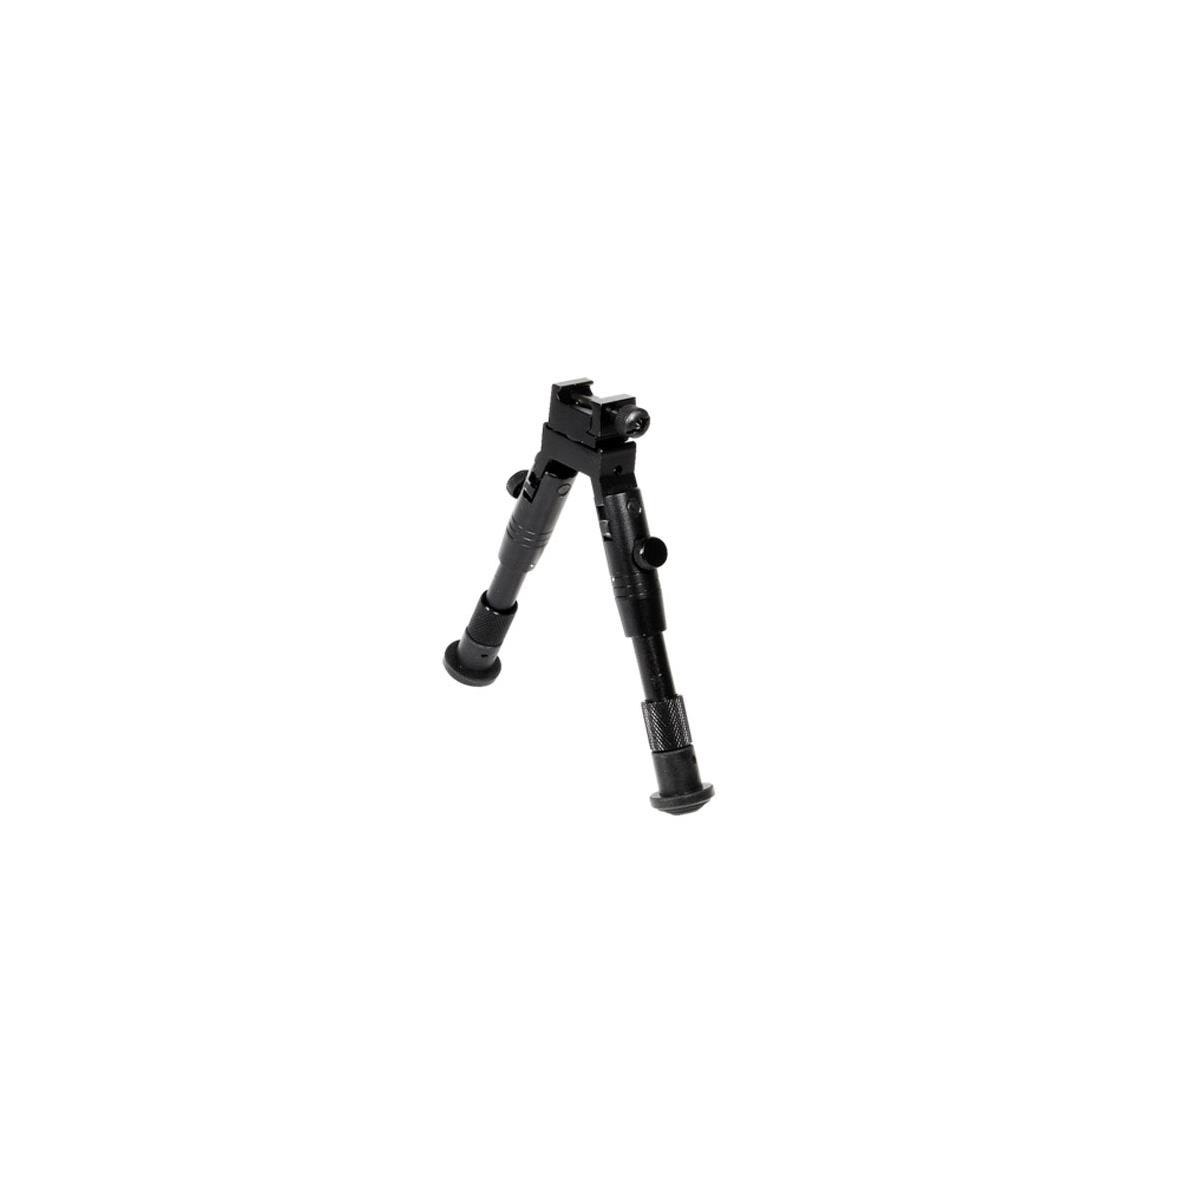 Image of UTG Leapers Universal Shooter's Bipod - SWAT/Combat Profile Adjustable Height